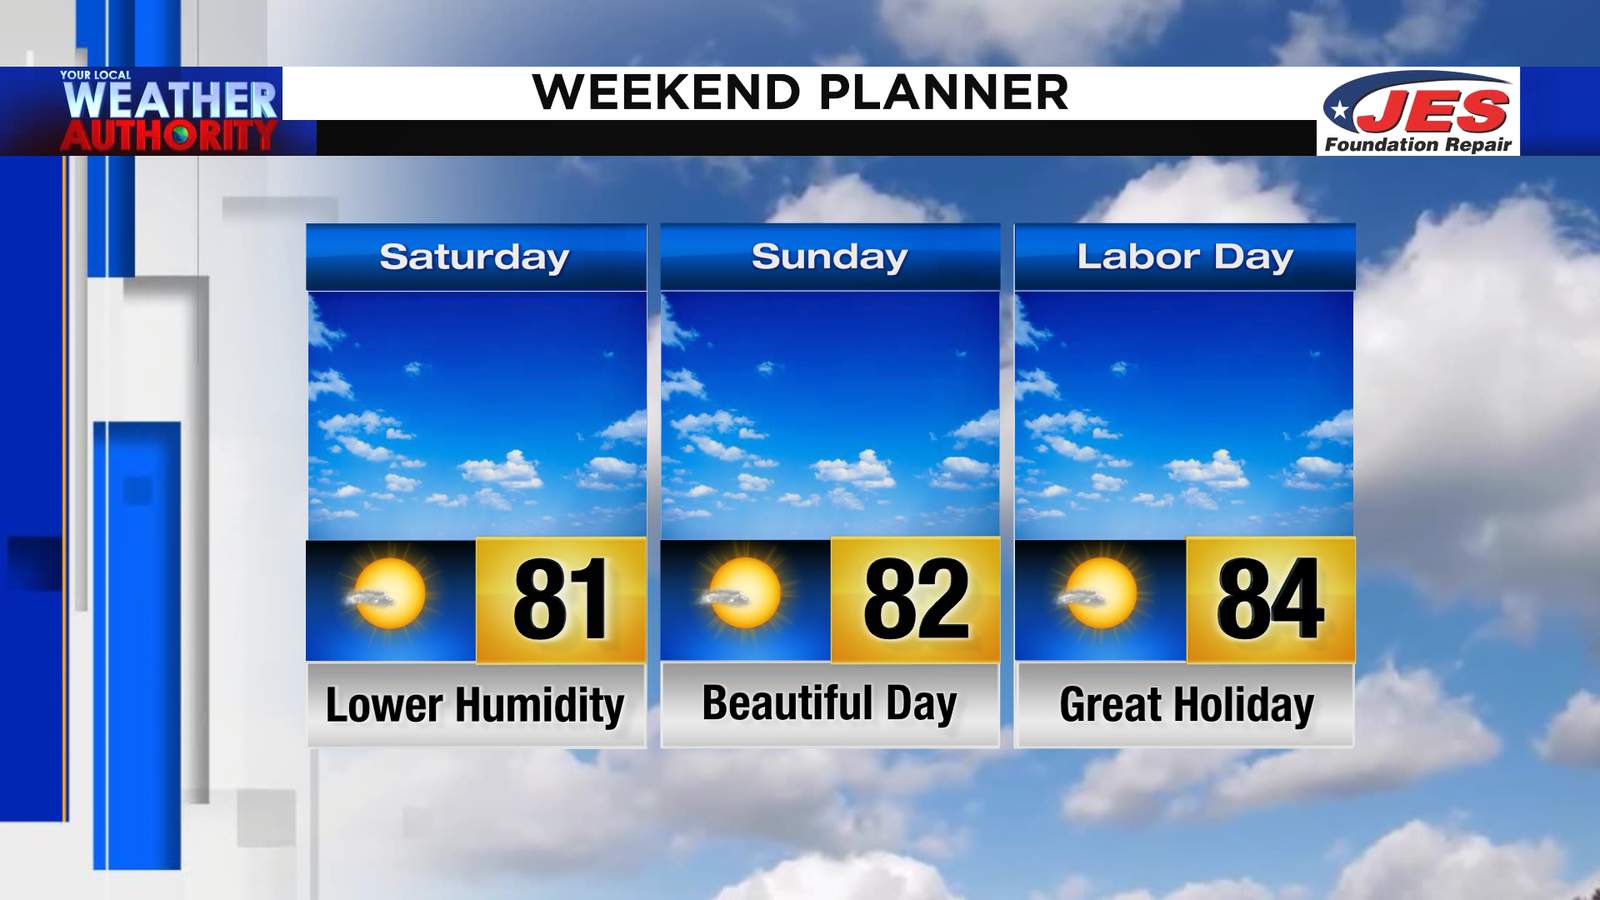 Sunshine, warmth and low humidity throughout the holiday weekend